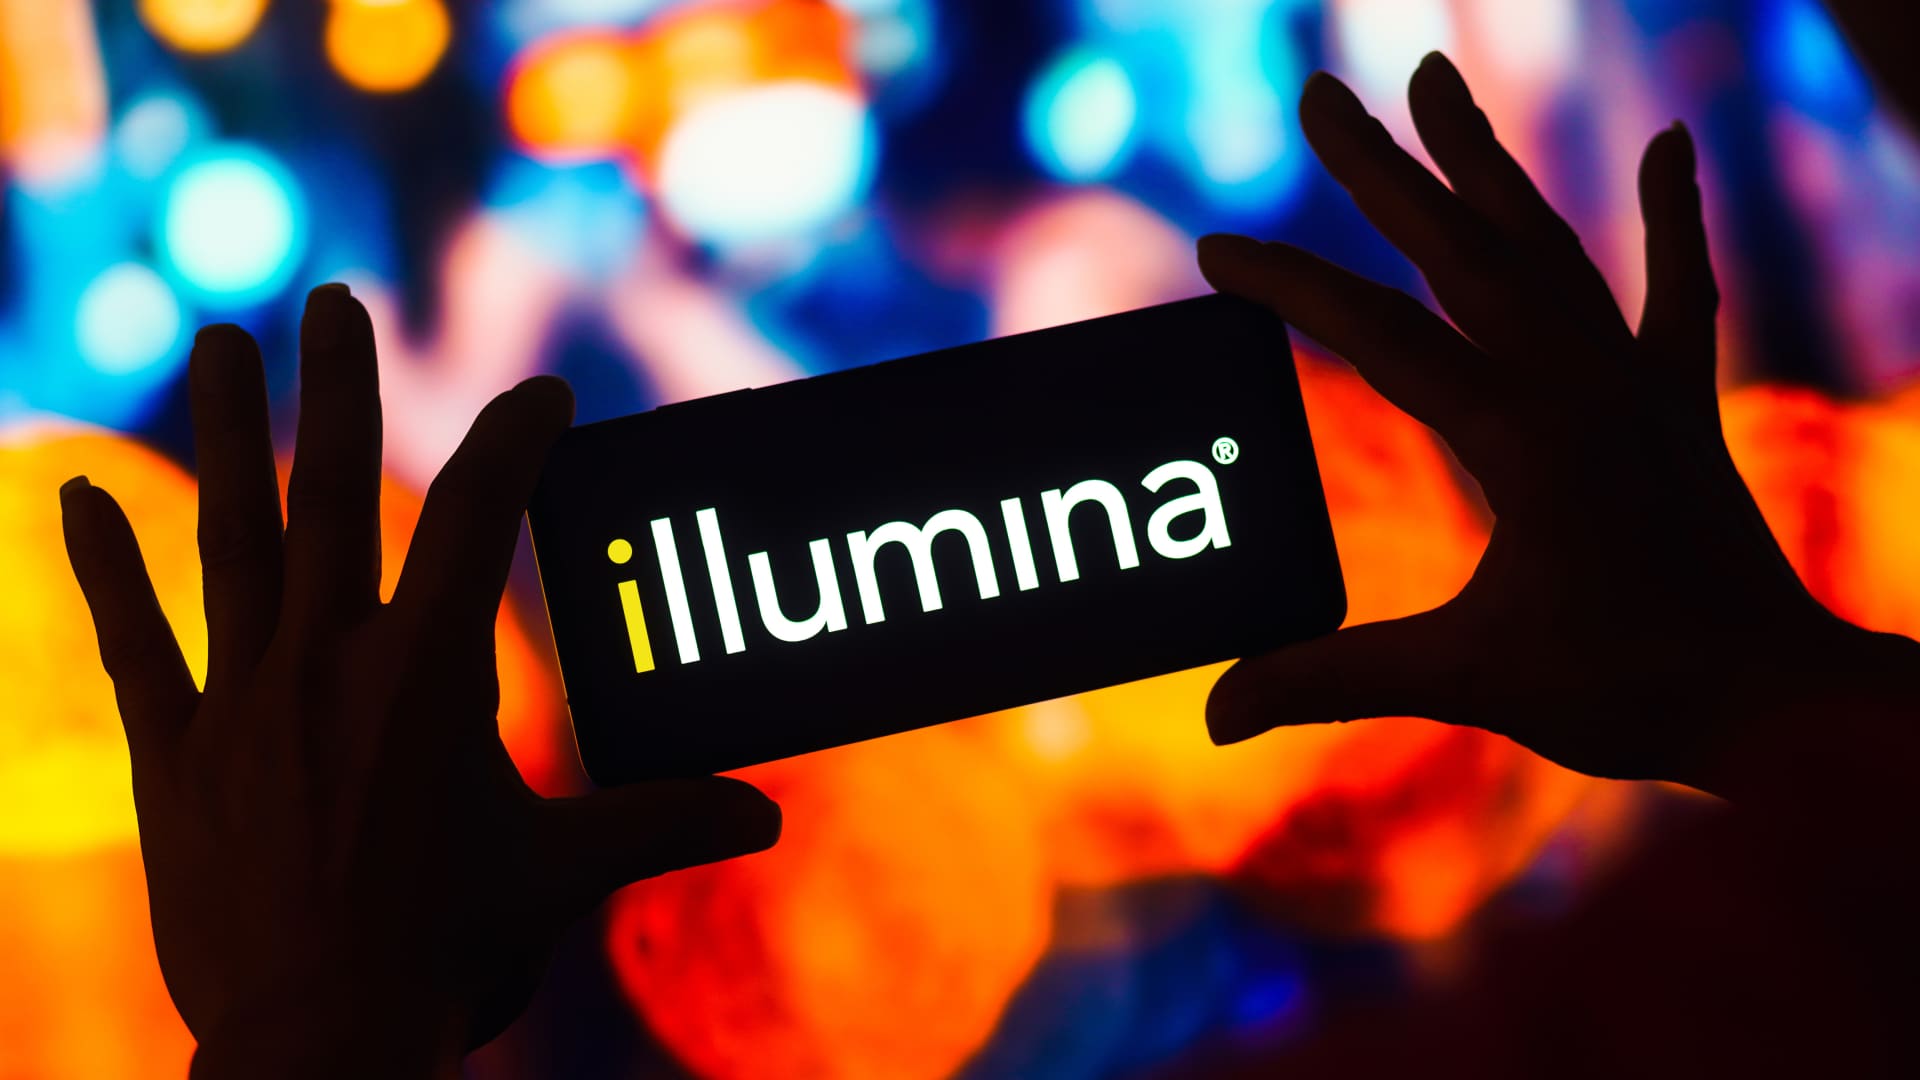 Illumina acquisition of Grail wins support from GOP lawmakers, state AGs as FTC tries to block it